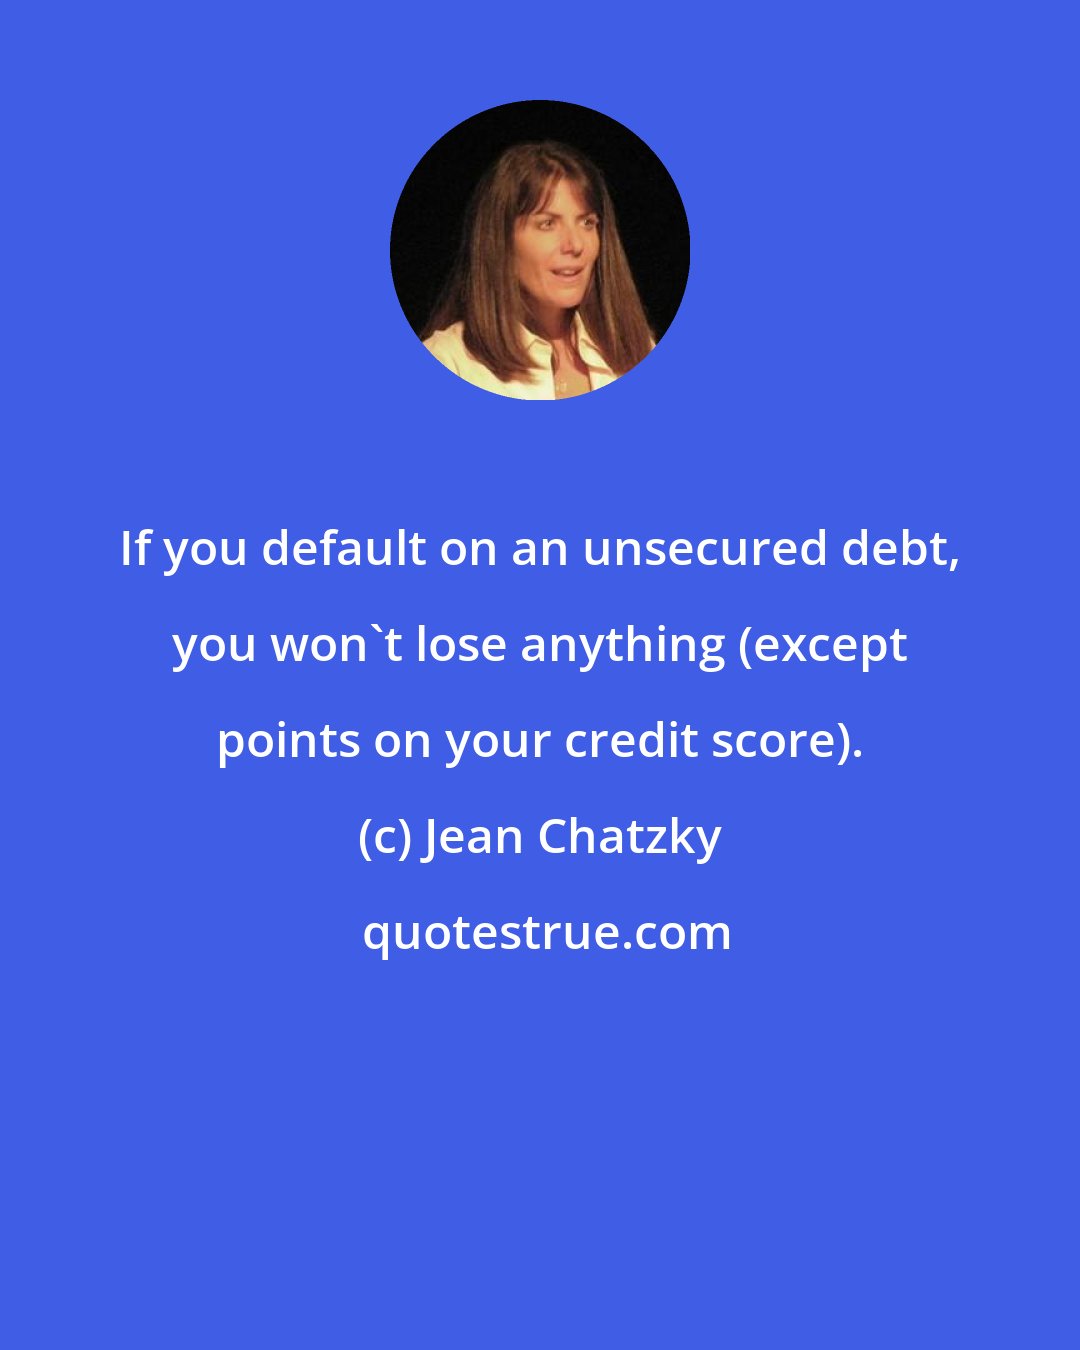 Jean Chatzky: If you default on an unsecured debt, you won't lose anything (except points on your credit score).